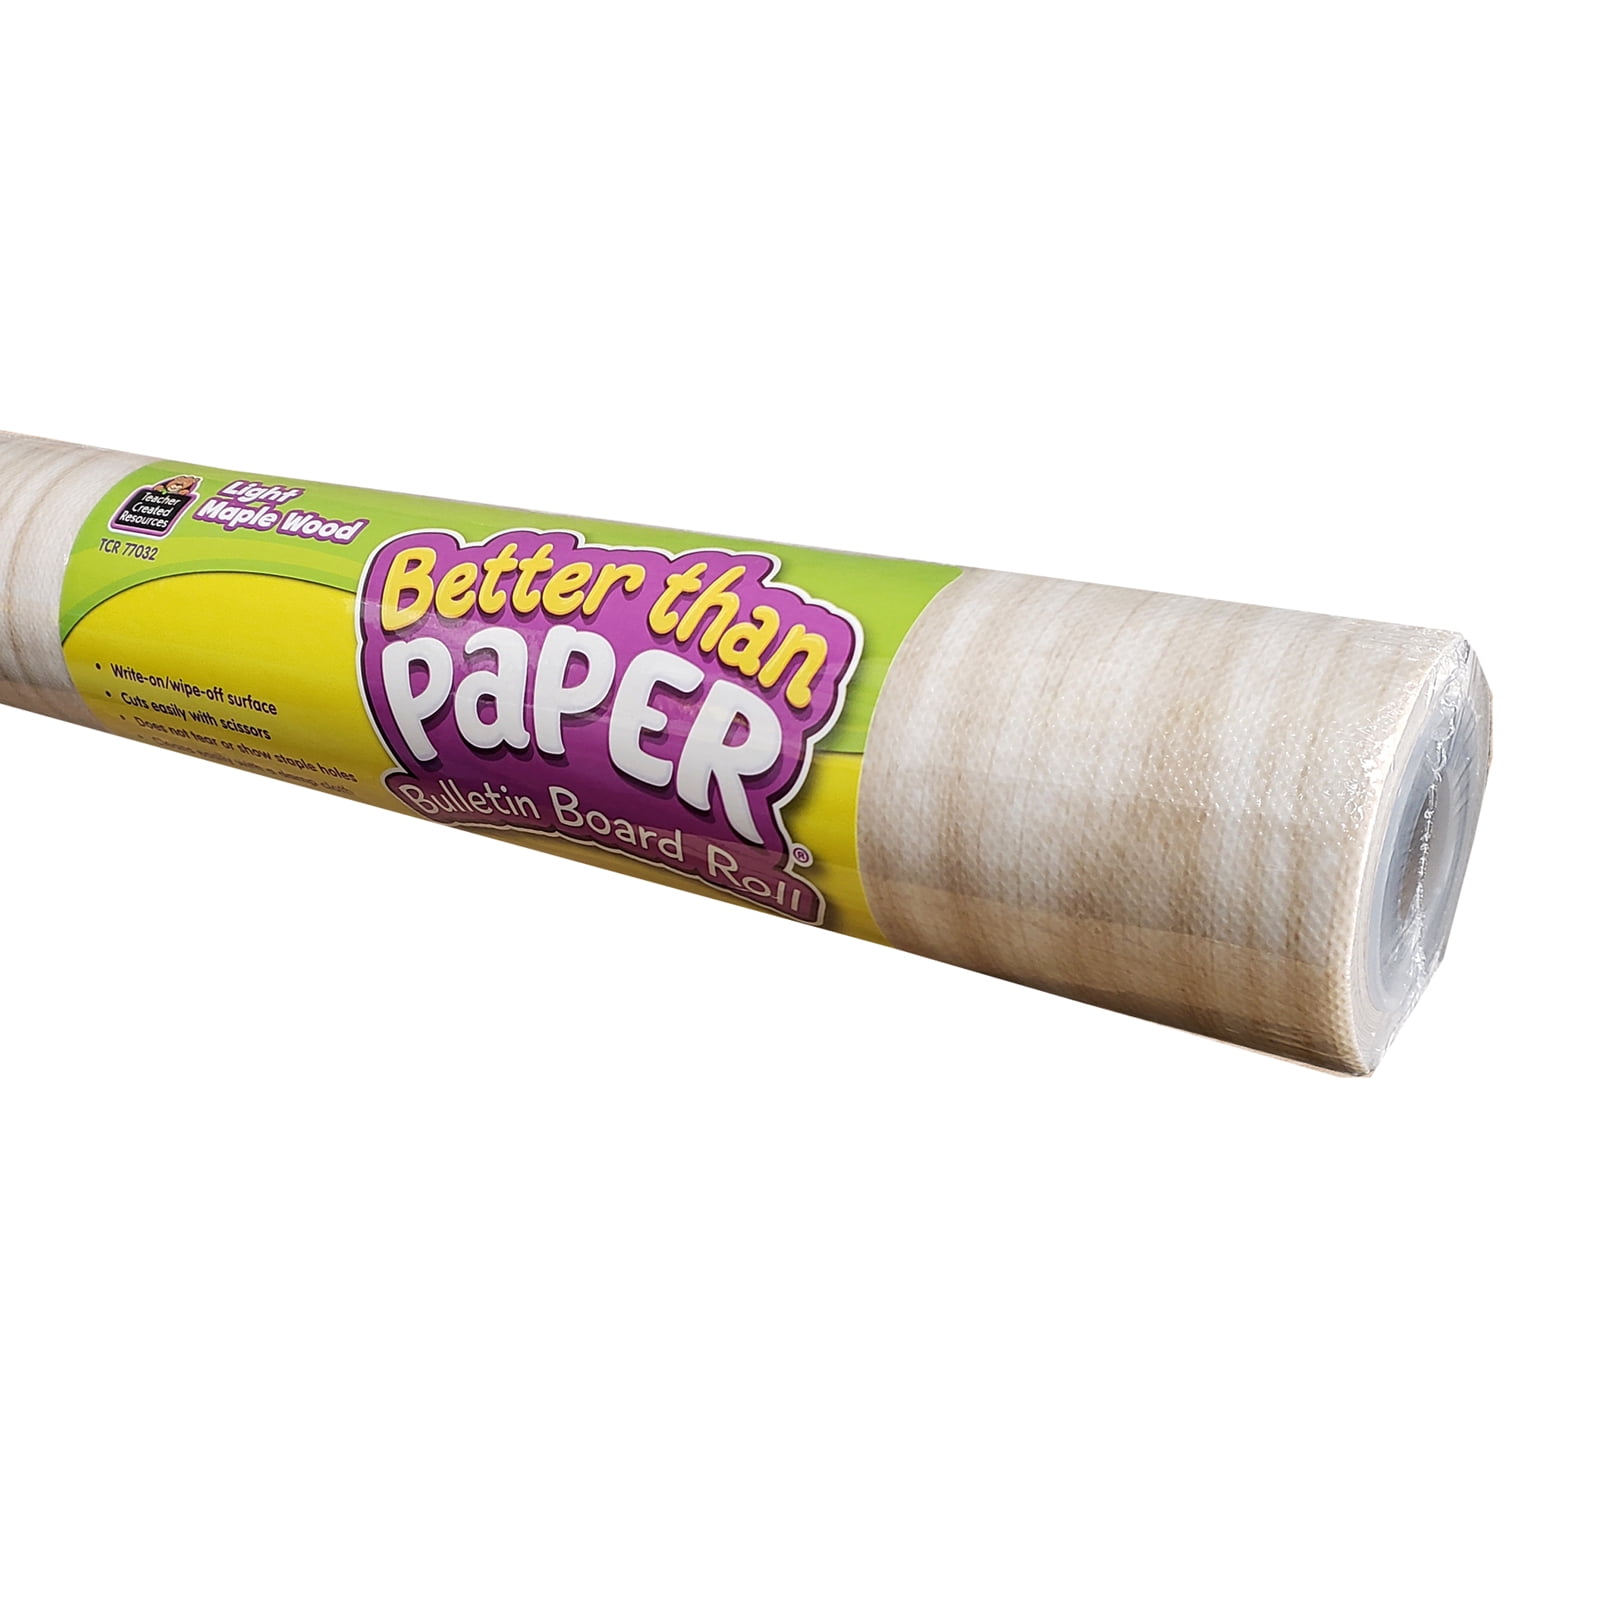 Teacher Created Resources Better Than Paper Bulletin Board Roll, Beachwood - Pack of 4